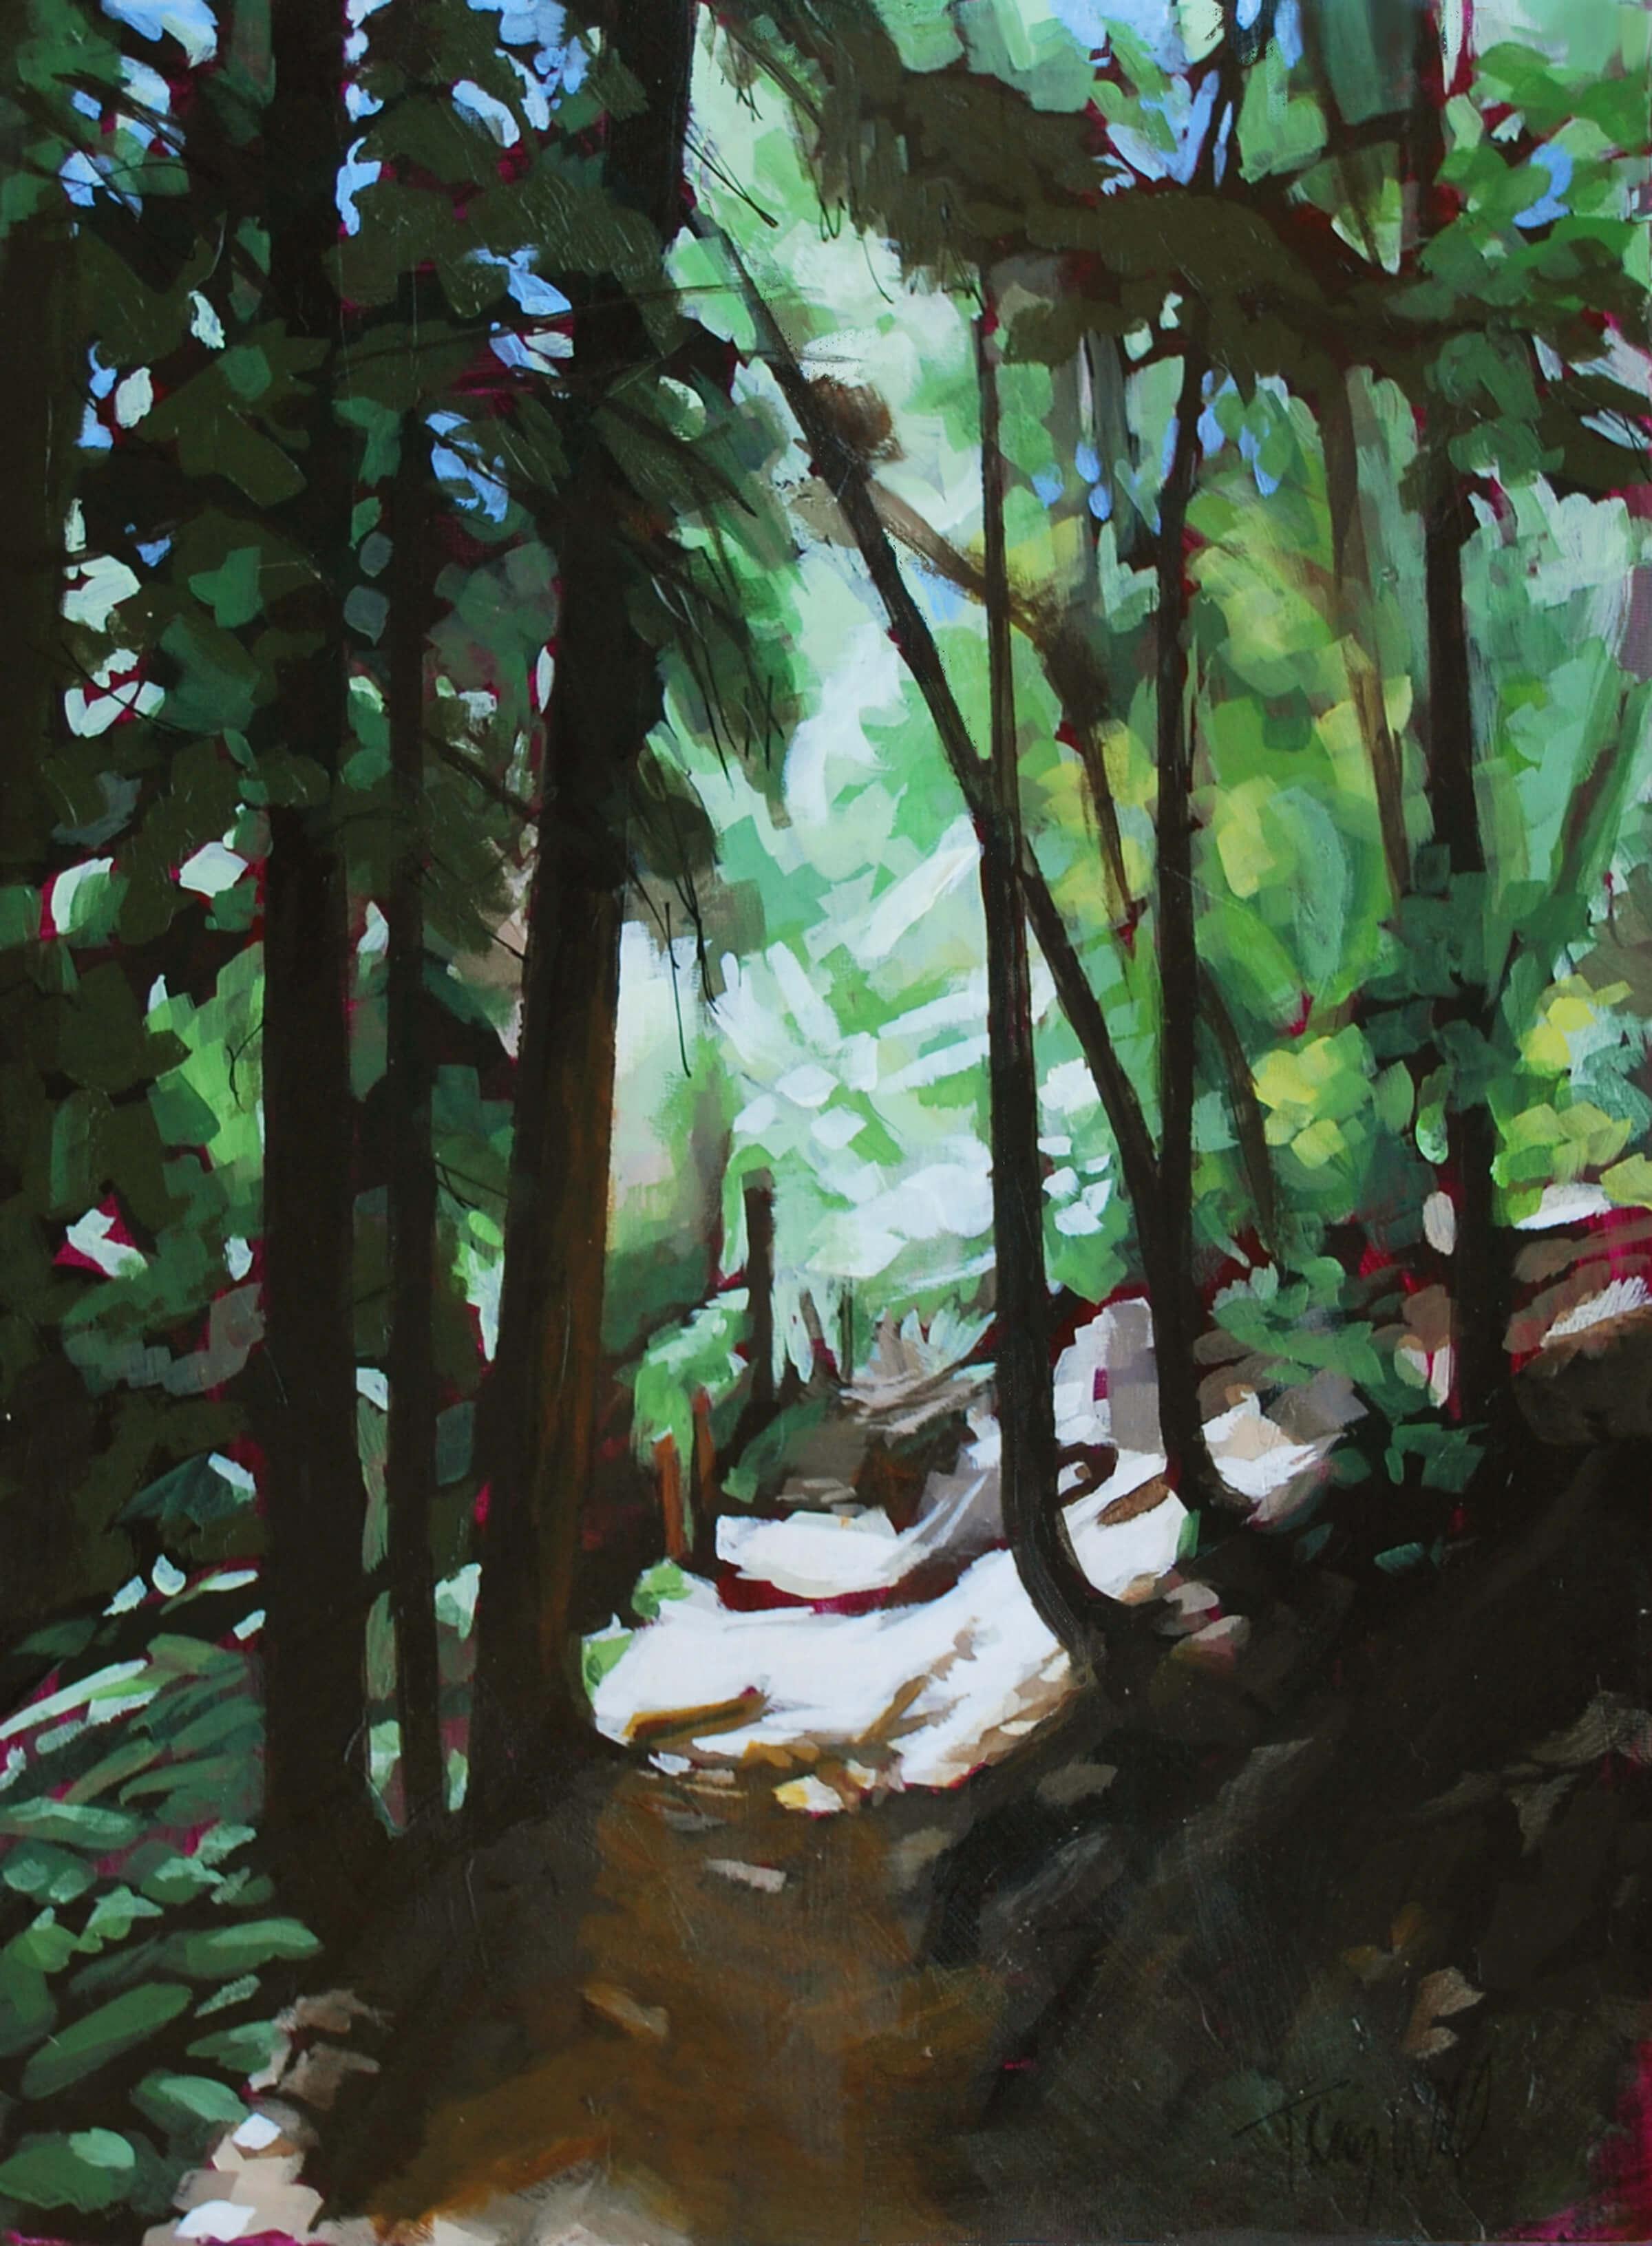 Tracy Wall Figurative Painting - Forest Feeling, Original Mixed Media Painting